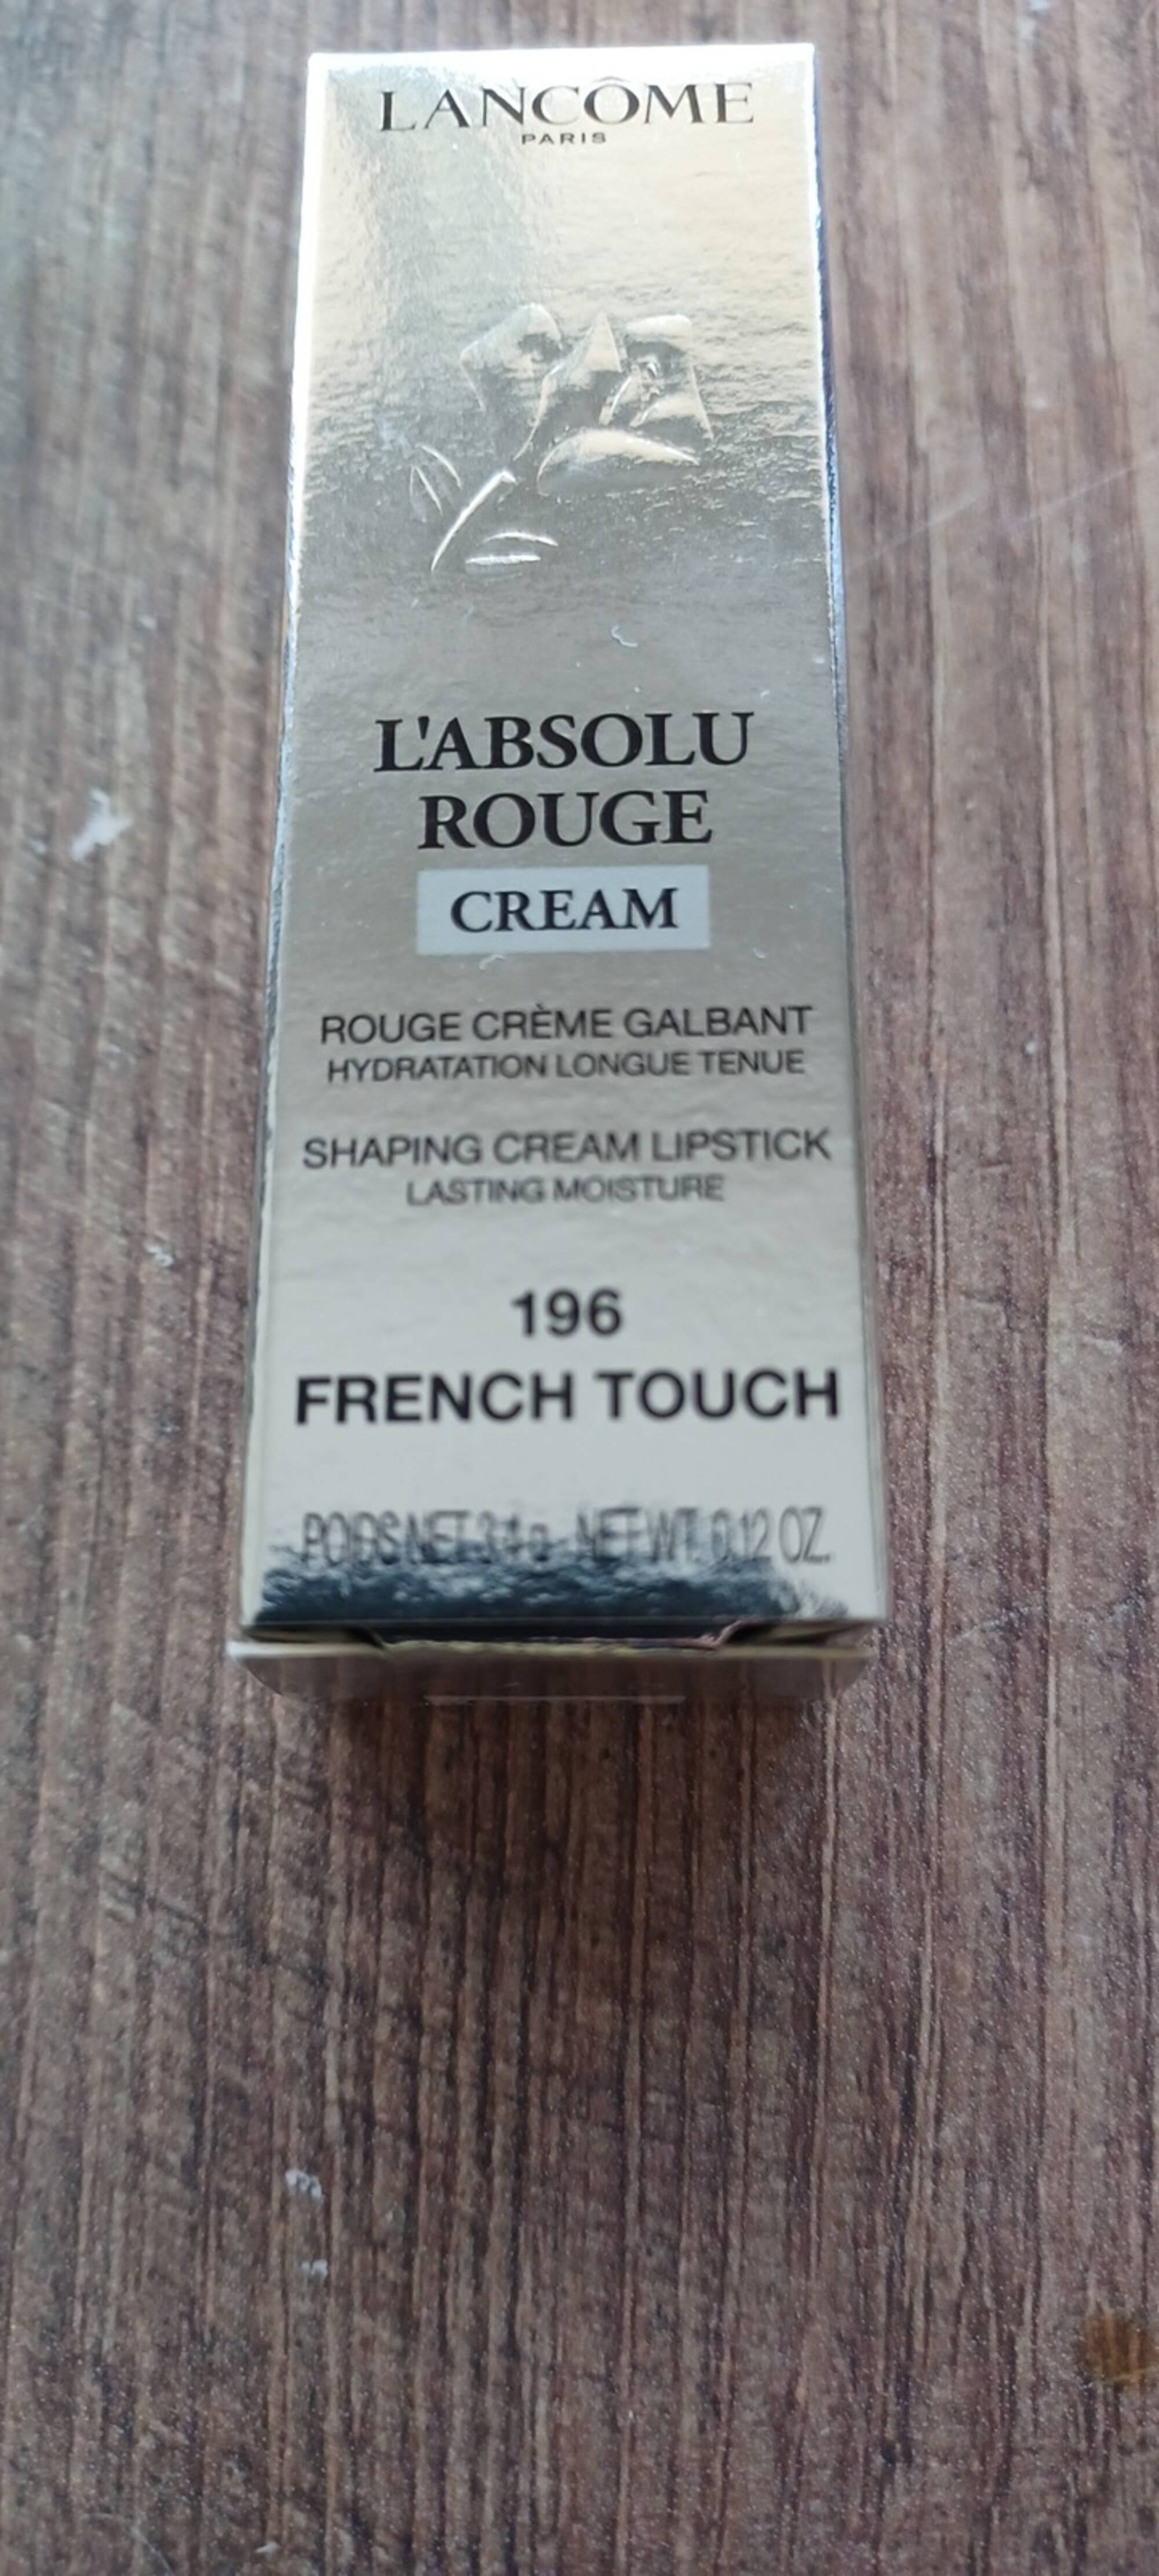 LANCÔME - L'absolu rouge - Rouge crème galbant 196 french touch